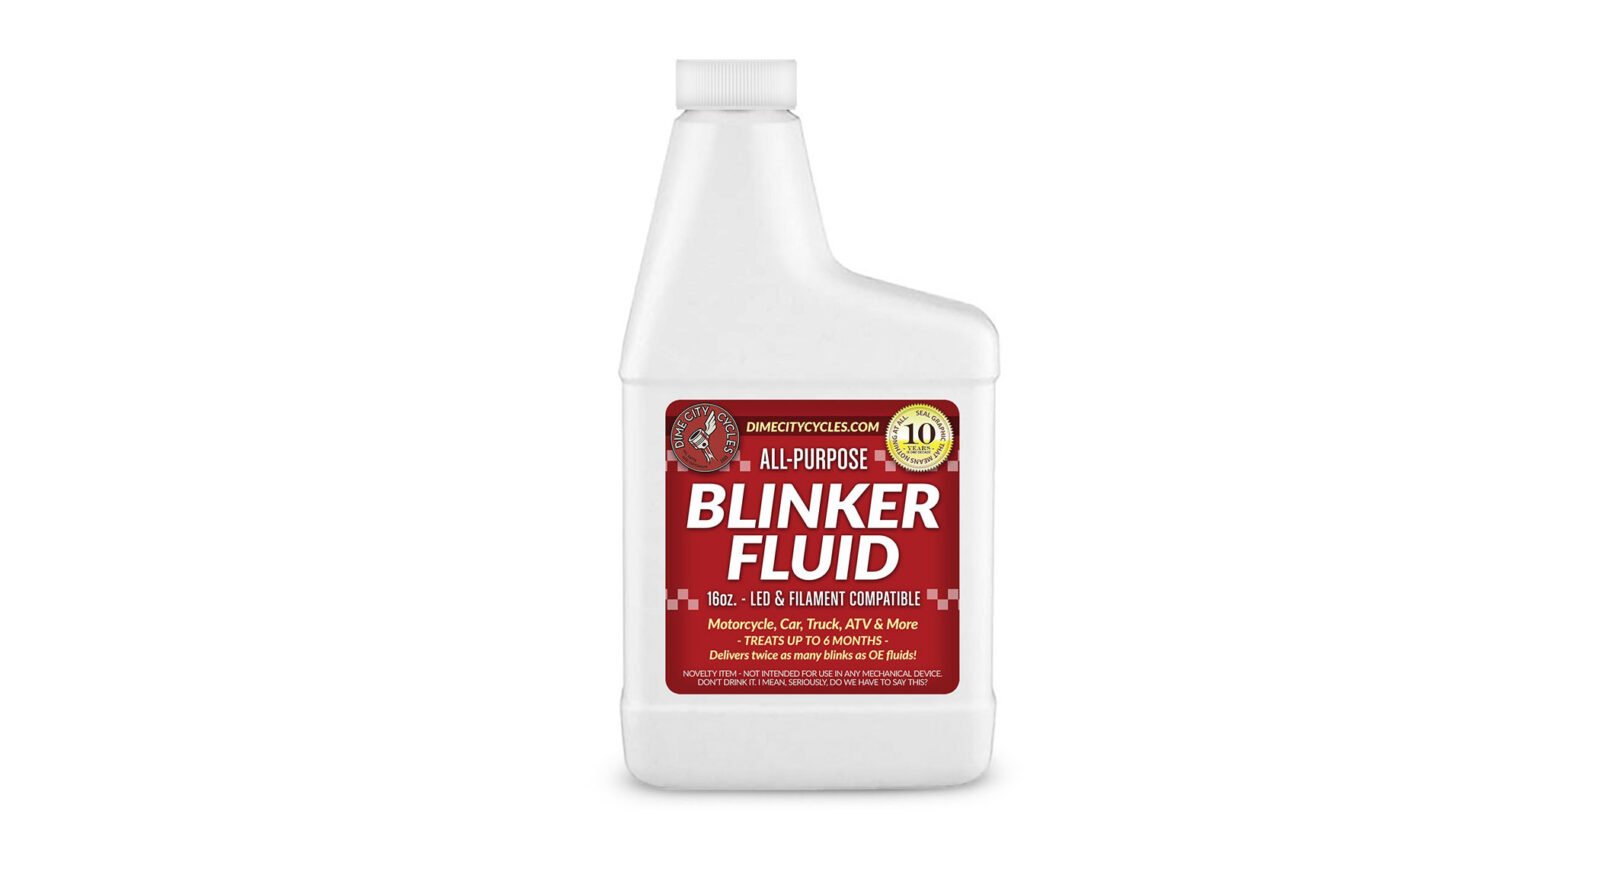 All Purpose Blinker Fluid by Dime City Cycles